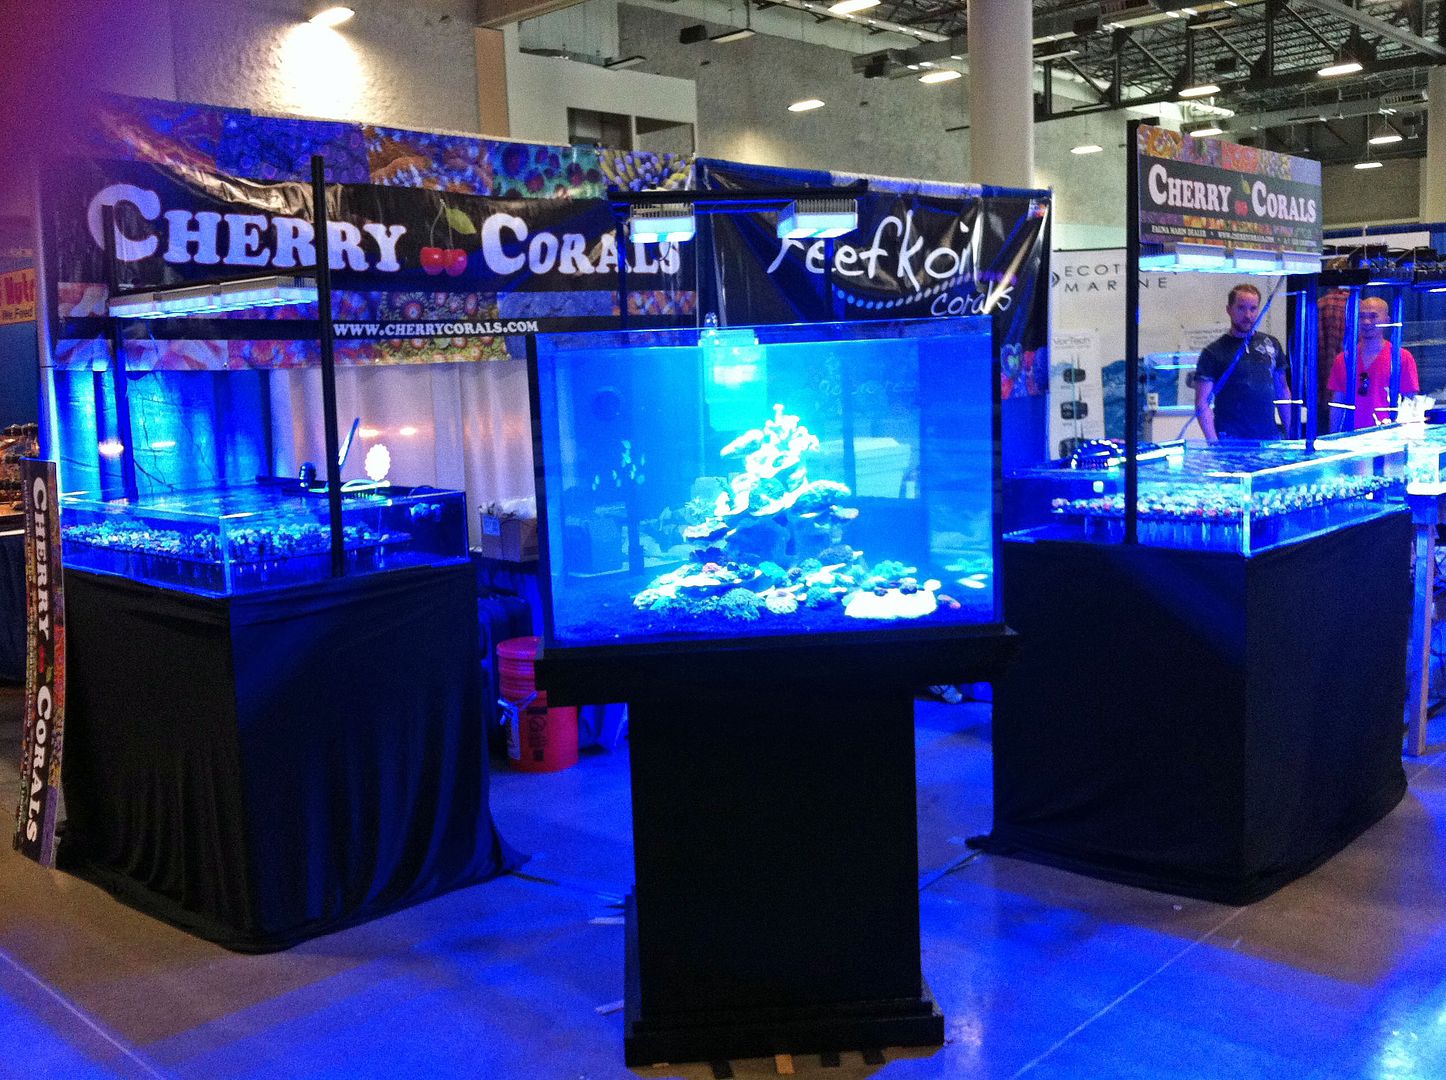 photo 1 - Cherry Corals all most set up for MACNA